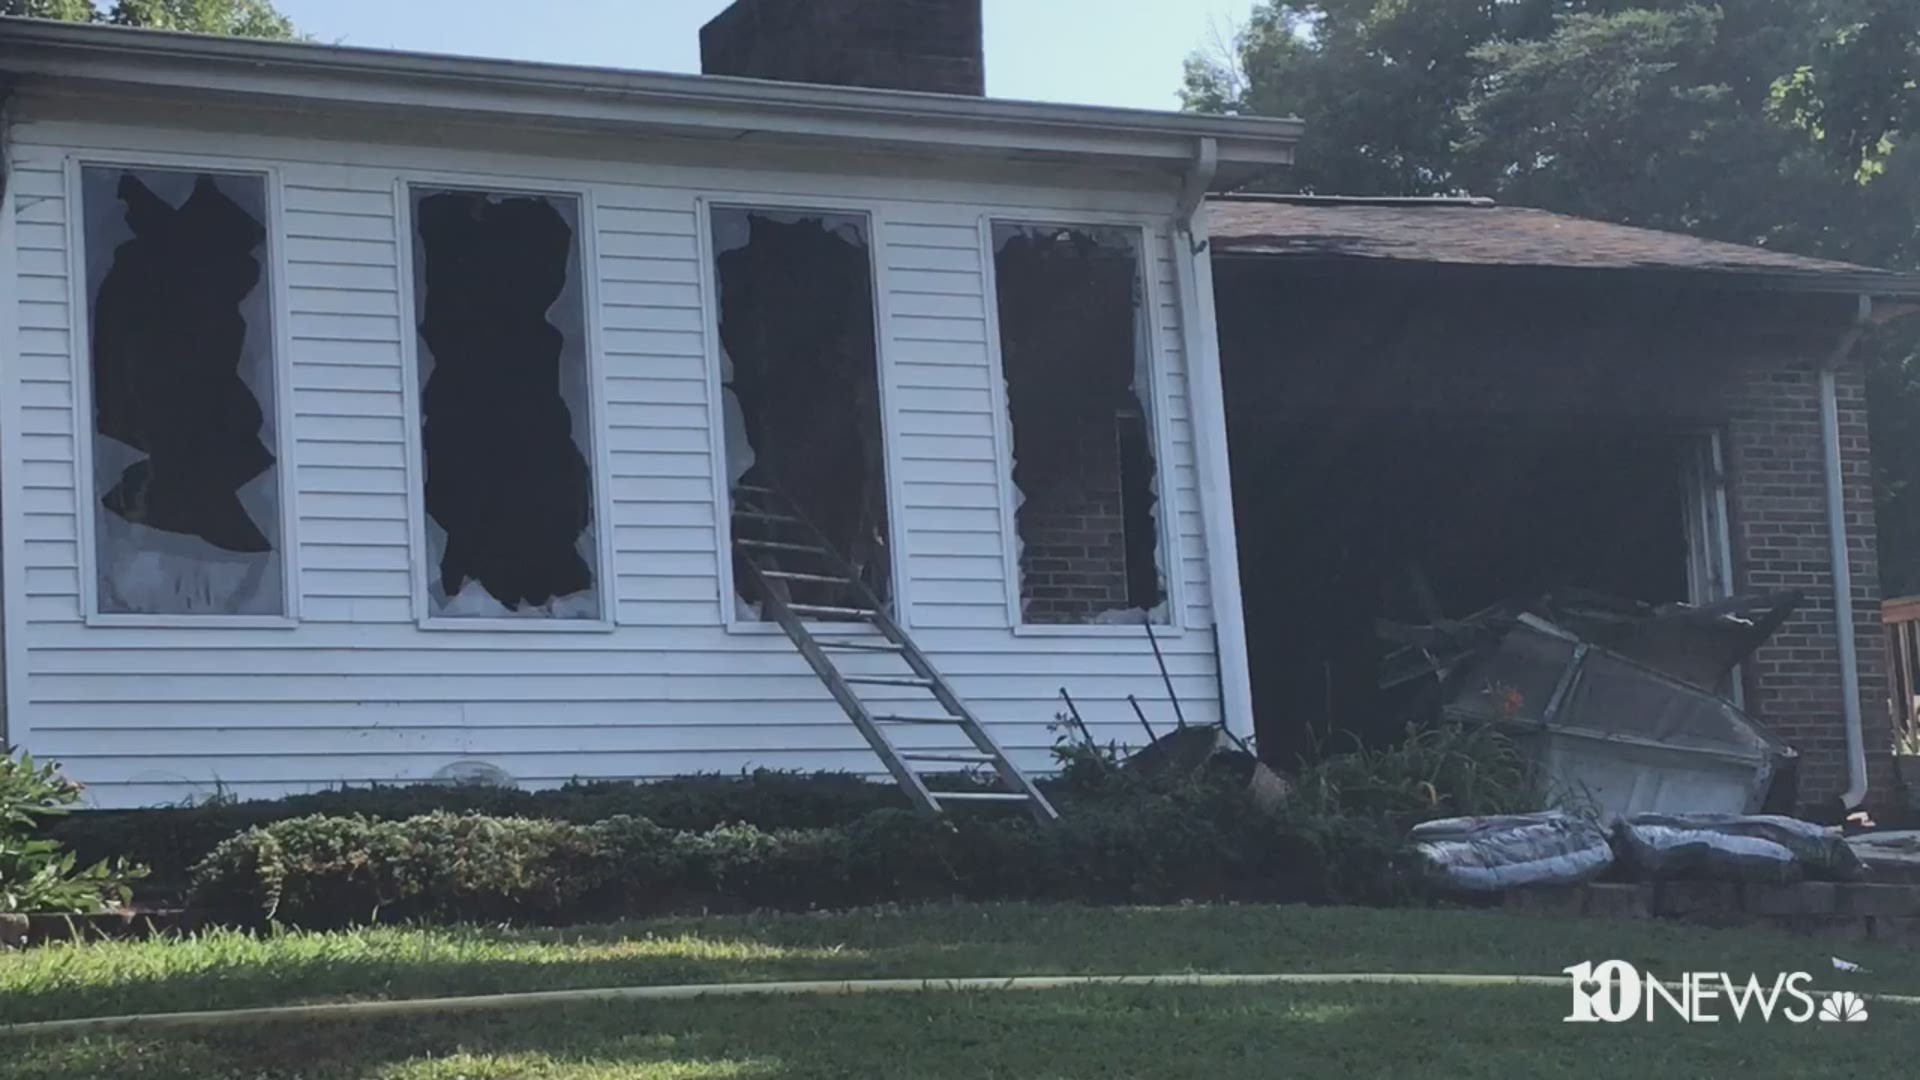 Shortly after crews made entry into the house, something exploded and two firefighters were injured. One was treated on the scene. The other was transported to a hospital for treatment of minor injuries. The house is believed to be a total loss. The homeowner and her pets made it out safely.